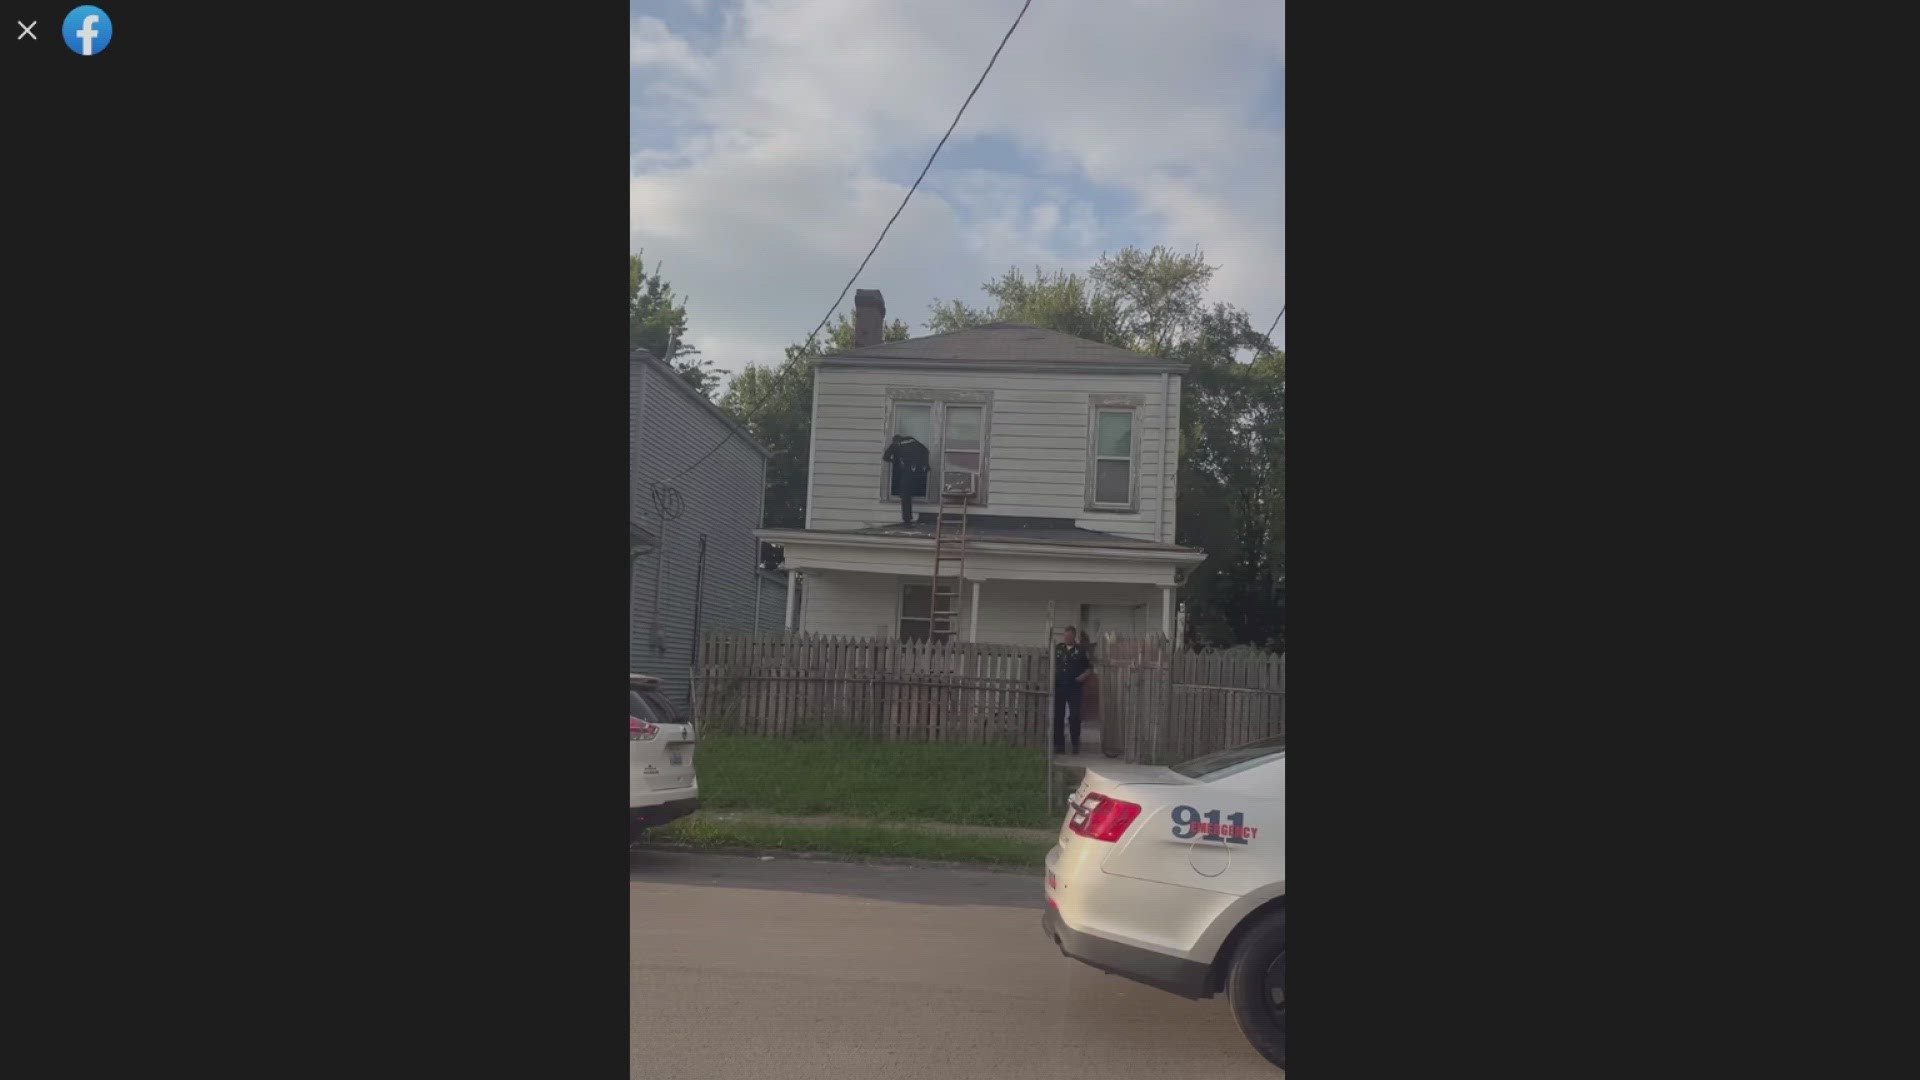 Lmpd Rescues Woman Found Chained To Floor In House Searching For Known Suspect